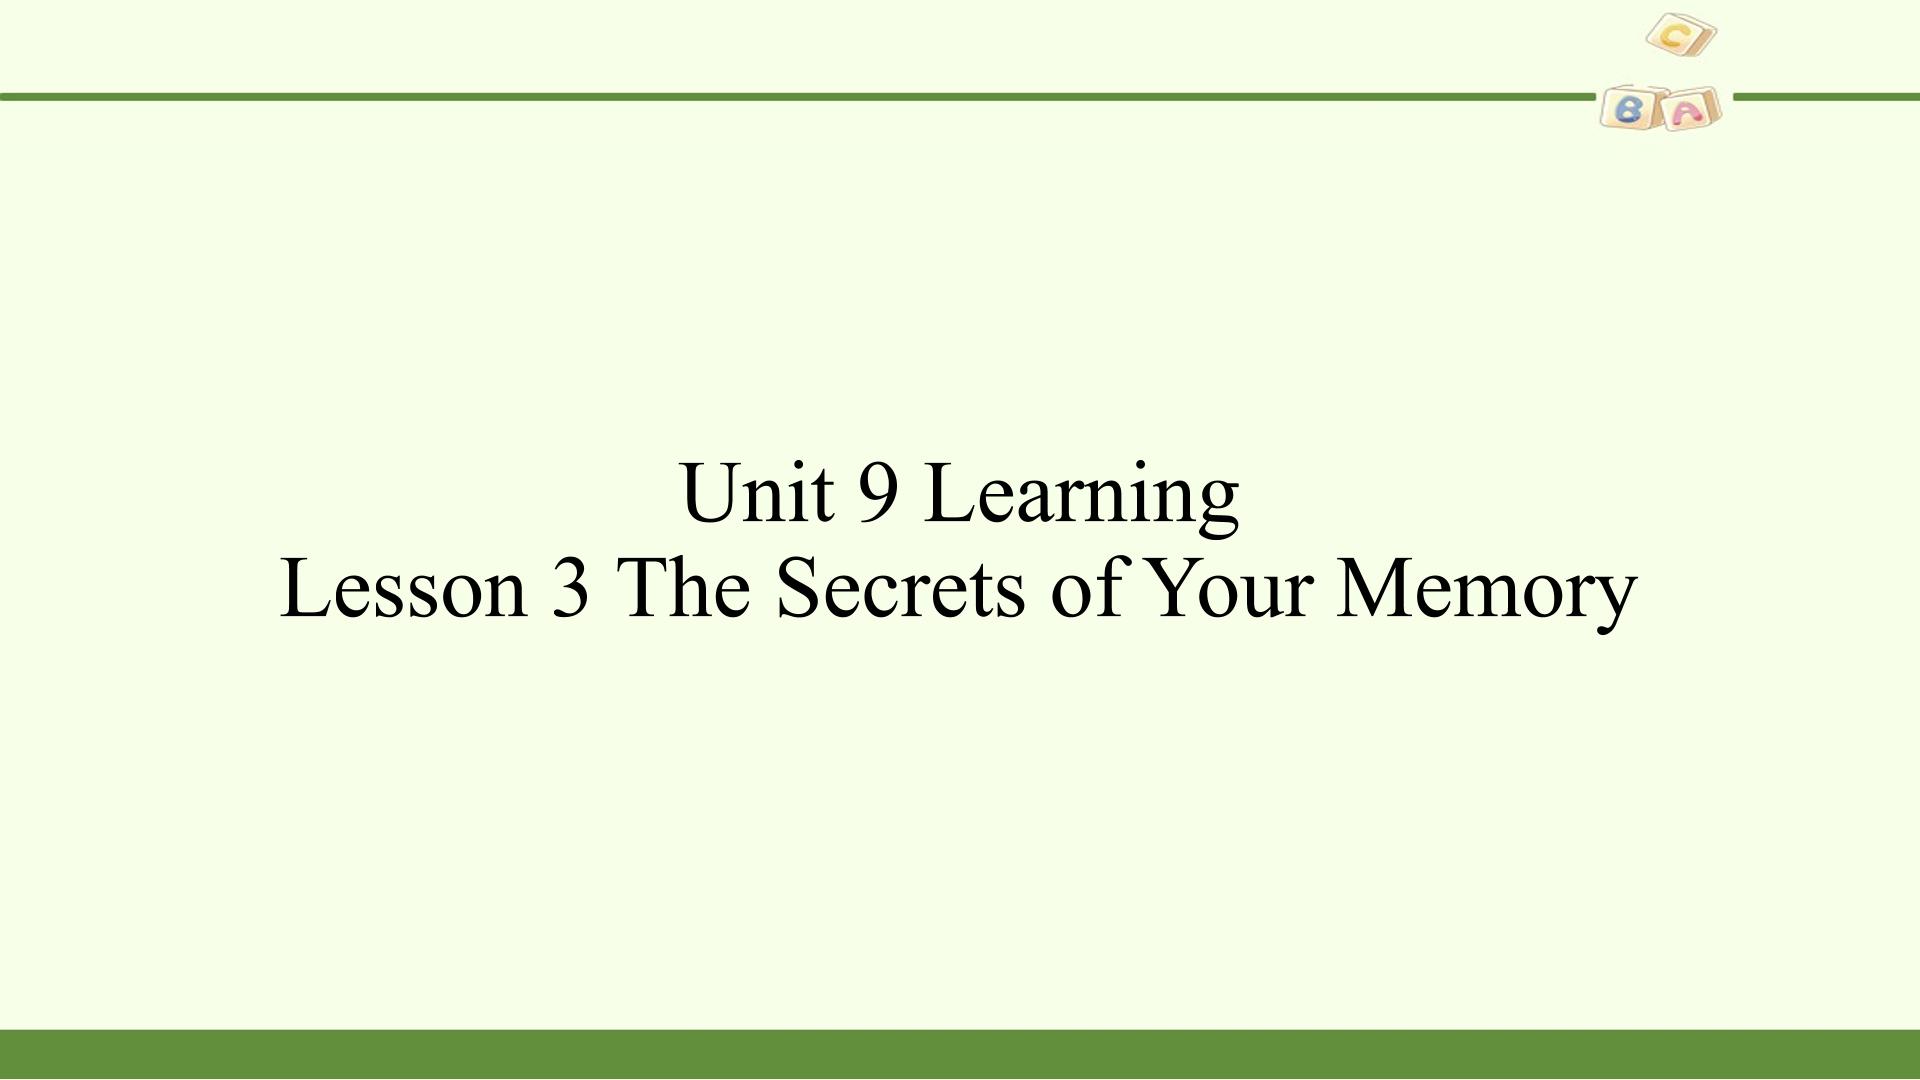 Lesson 3 The Secrets of Your Memory